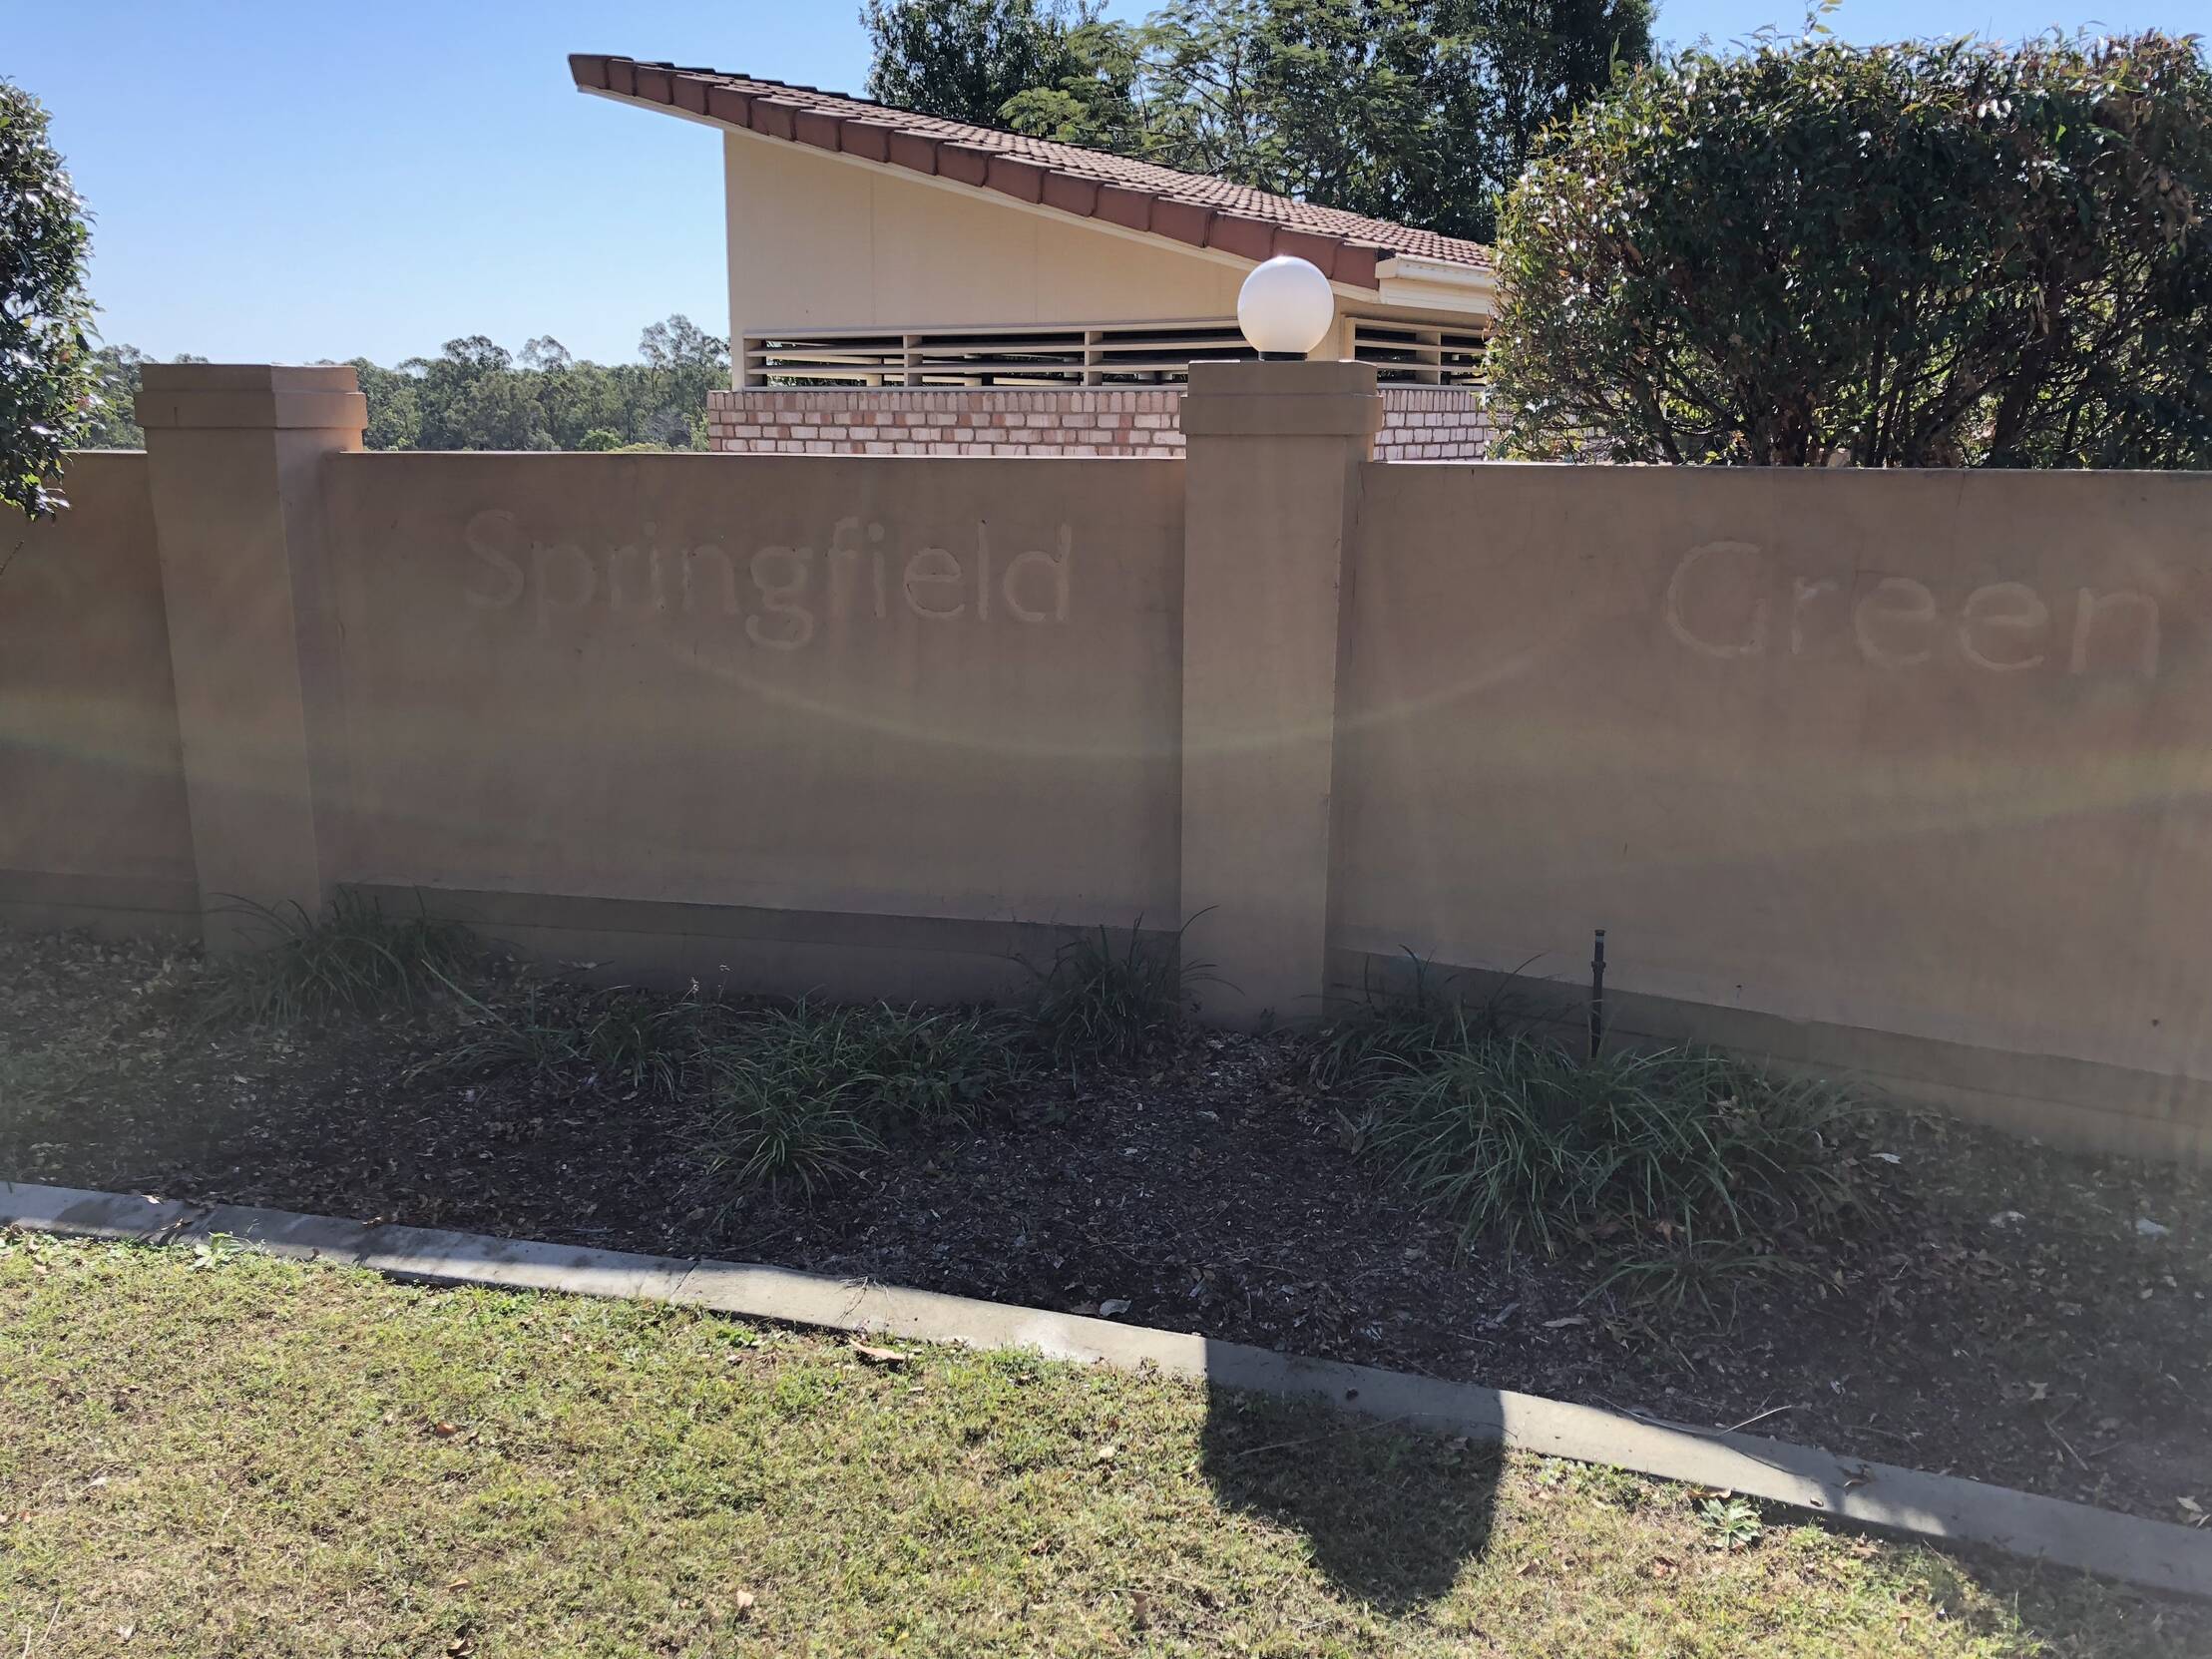 Wall with Springfield Green written on it and a property behind